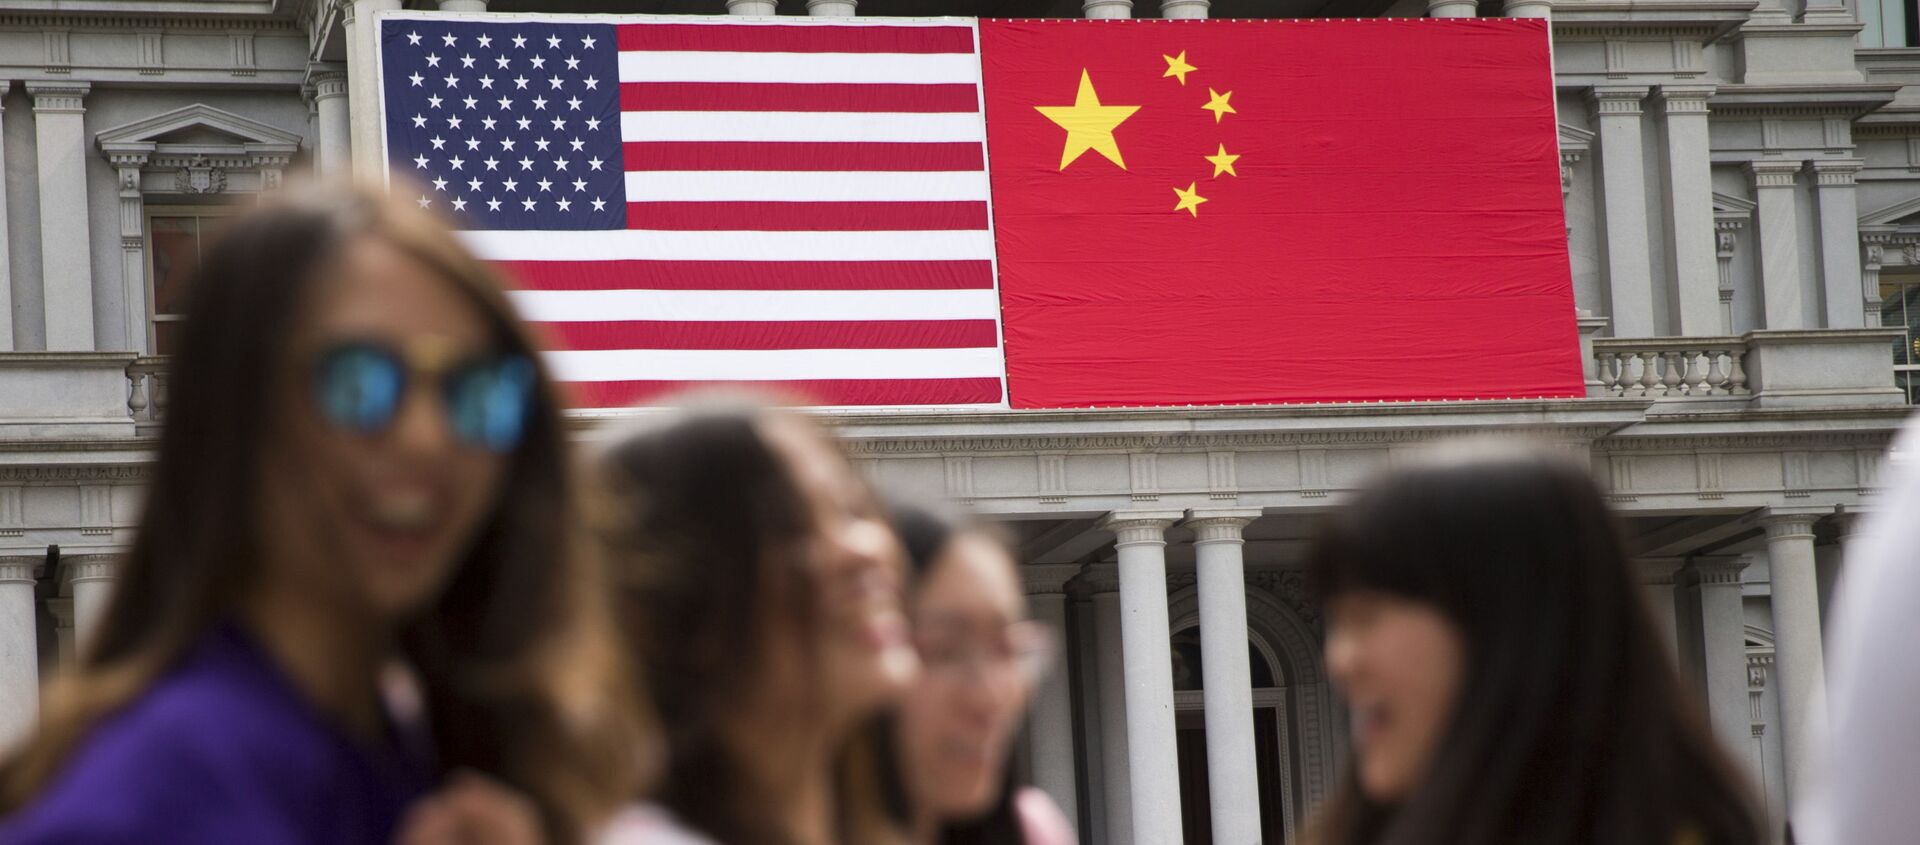 In this Thursday, Sept. 24, 2015, photo, China's flag is displayed next to the American flag on the side of the Old Executive Office Building on the White House complex in Washington, the day before a state visit by Chinese President Xi Jinping - Sputnik International, 1920, 29.12.2019